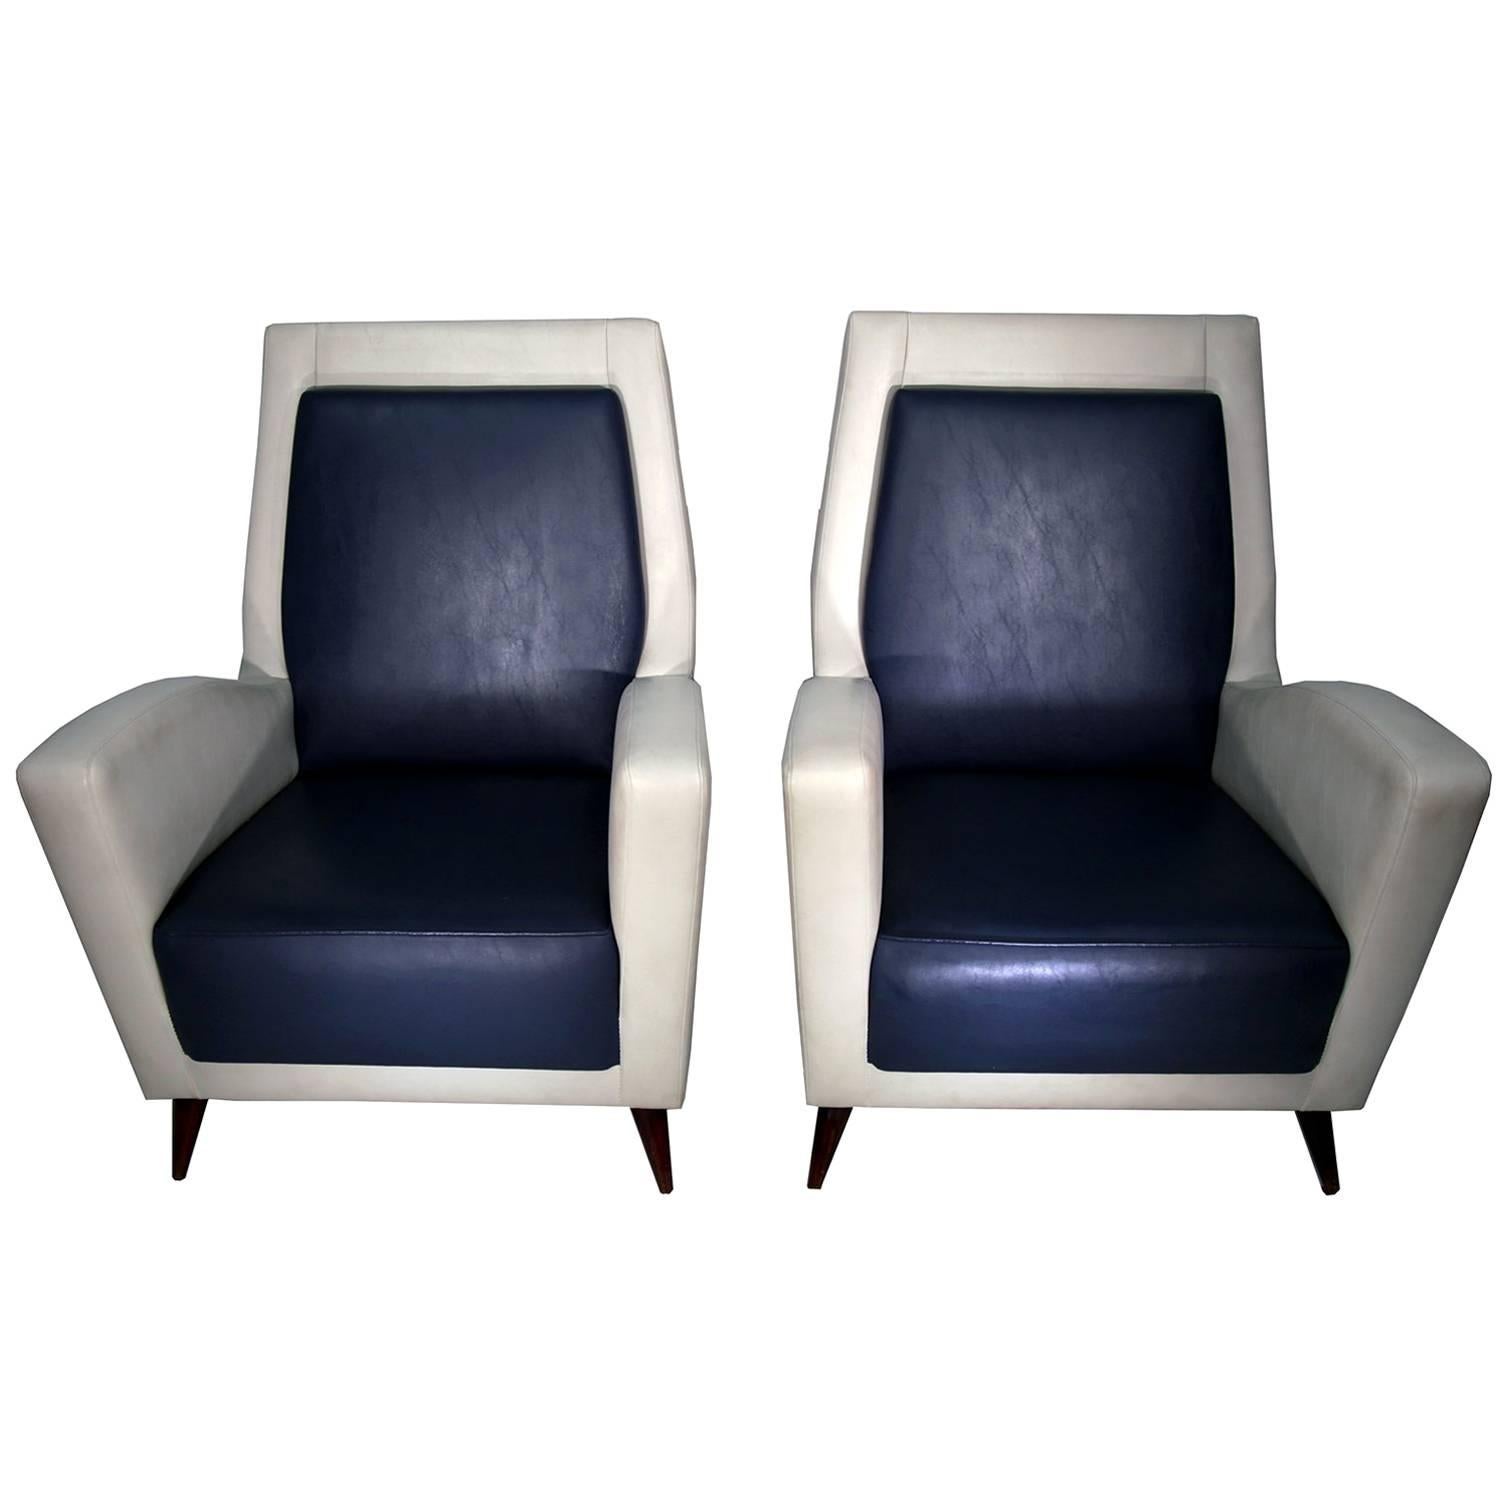 Pair of Italian Club Chairs in the Style of Gio Ponti